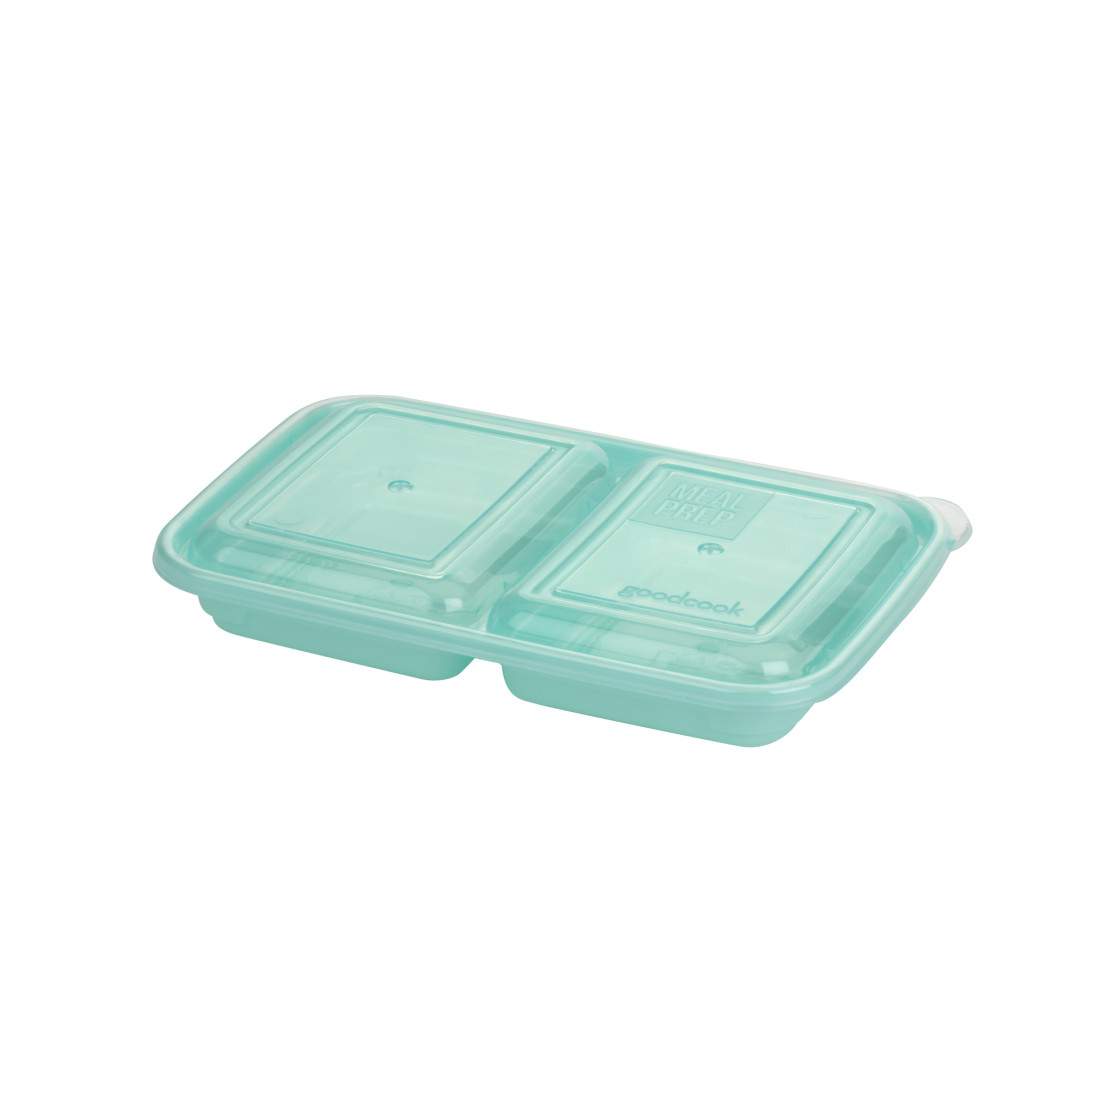 4-compartment Biscuit And Snack Storage Box, Fruit Divider And Container,  Lunch Portable Container For Fruit And Snacks